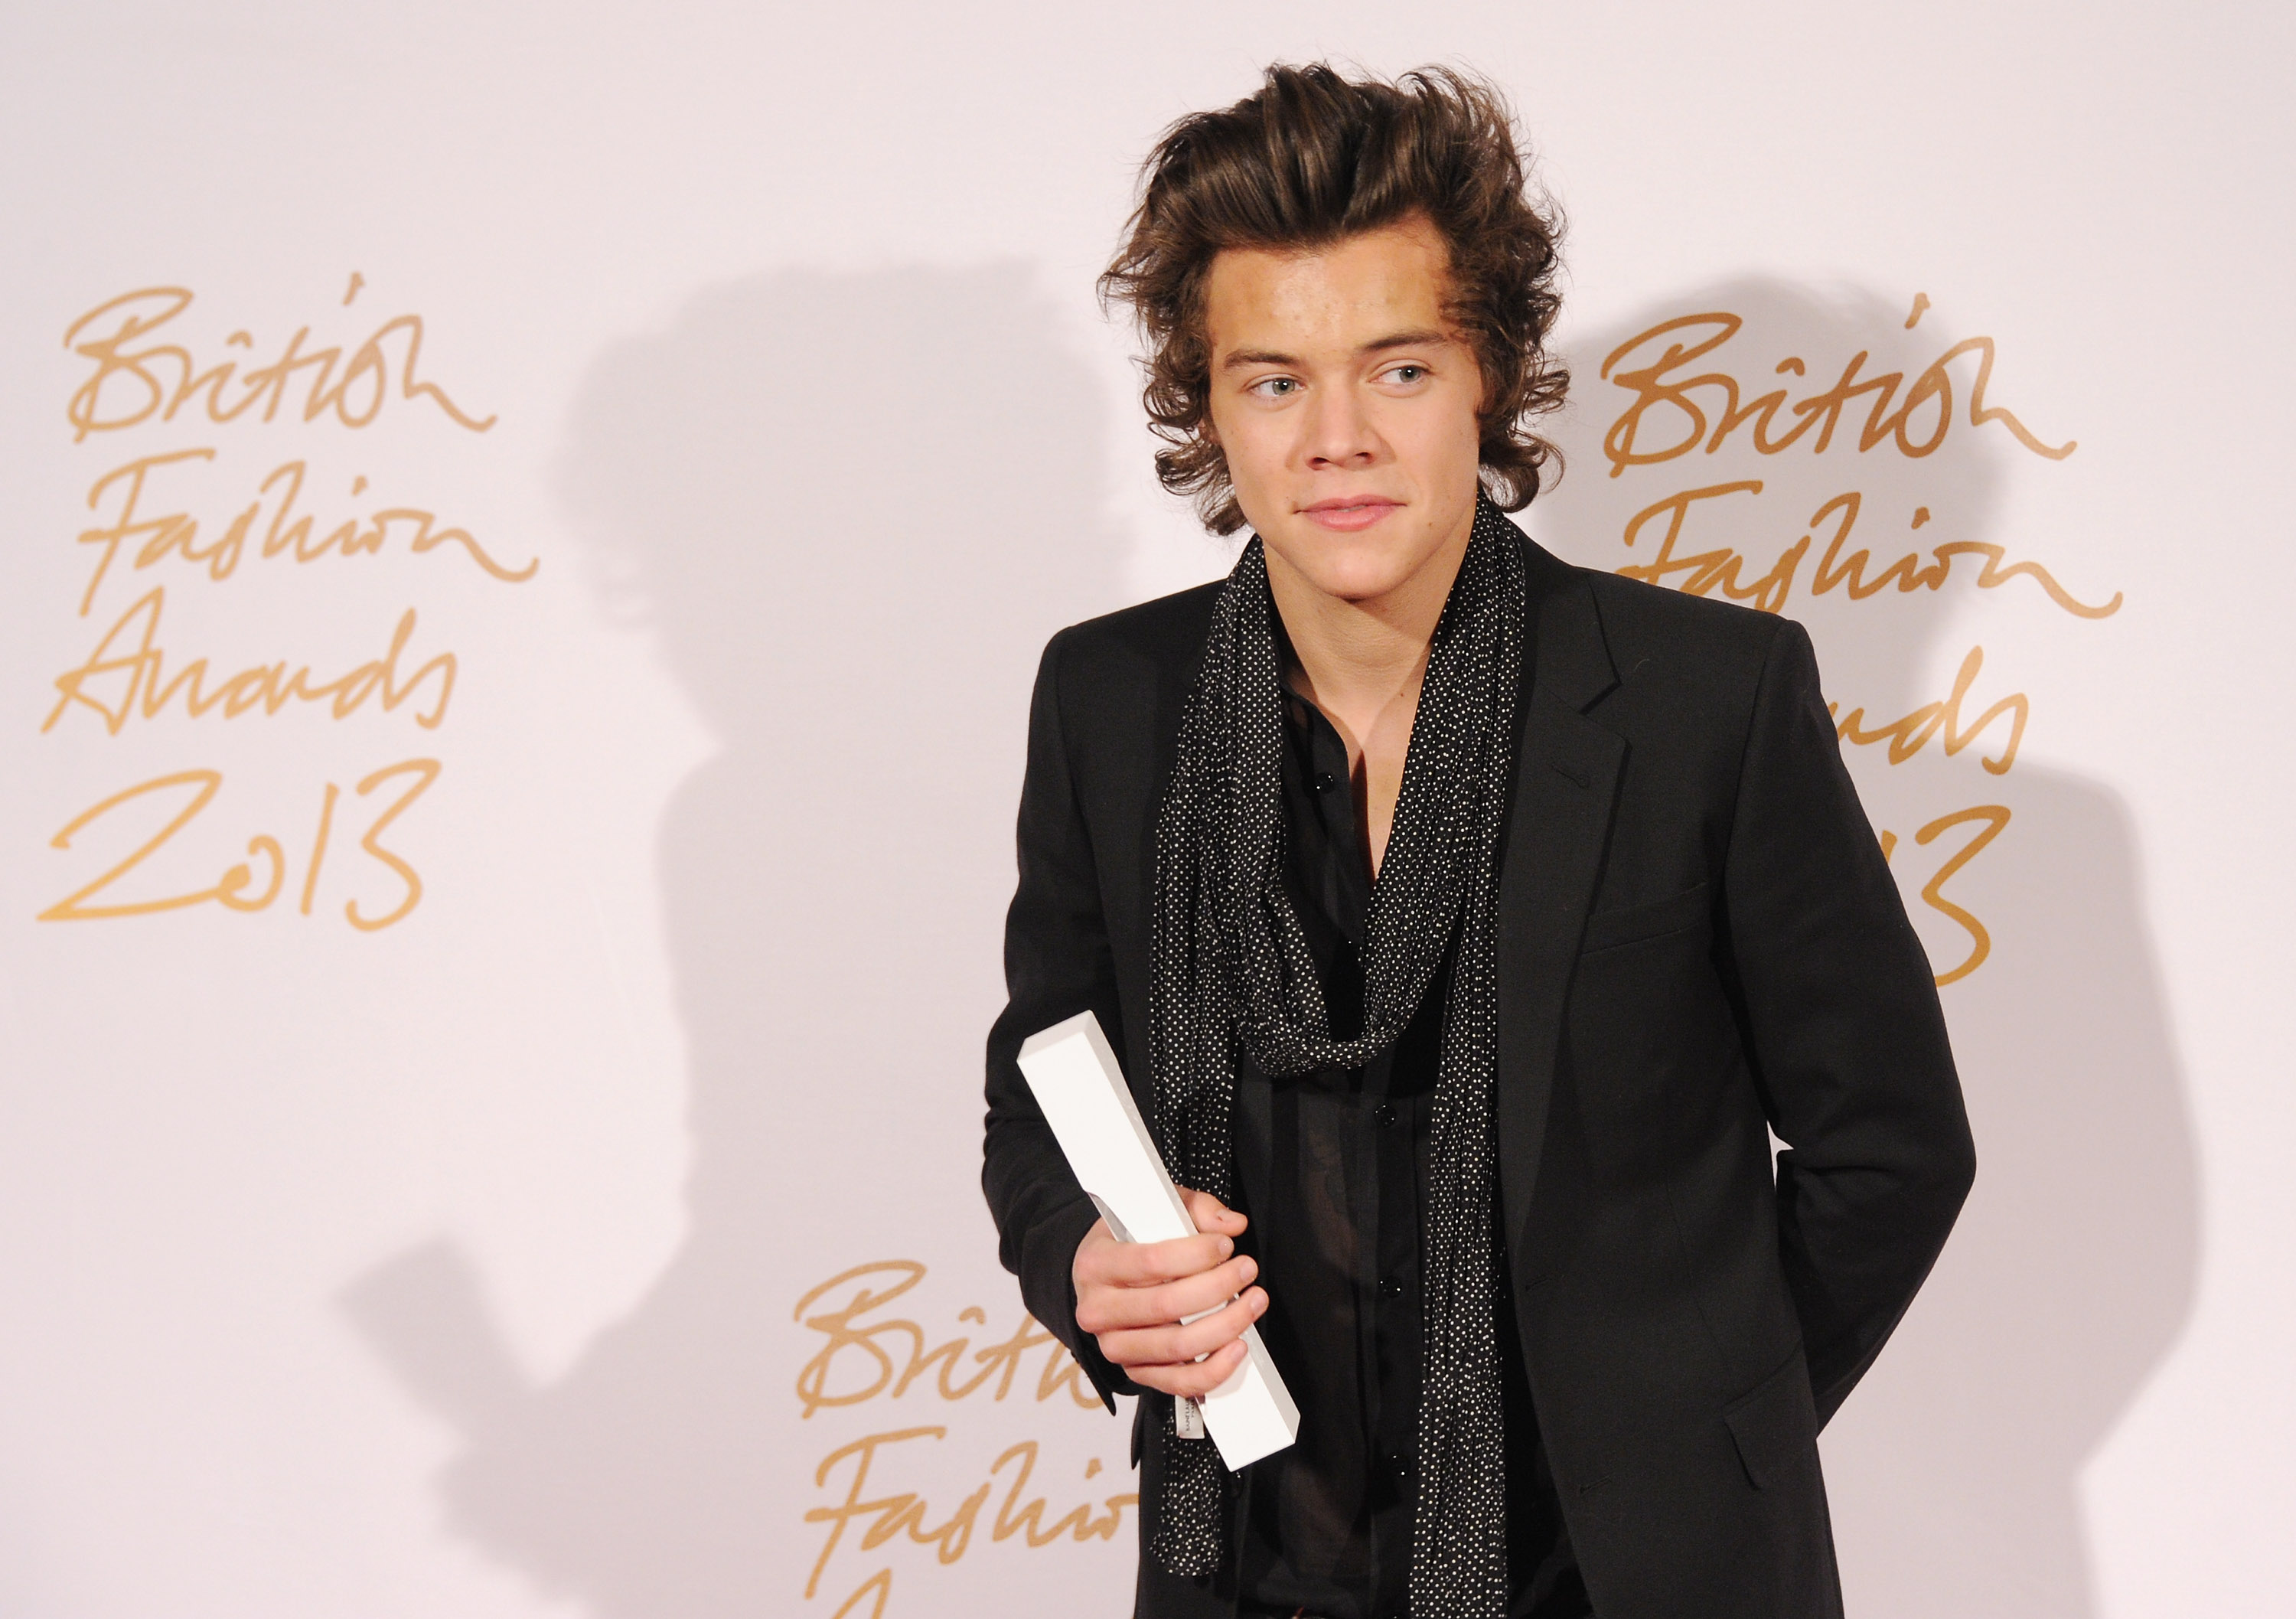 Harry Styles' Hair In 2013 Was All About Bedhead & Volume — PHOTOS